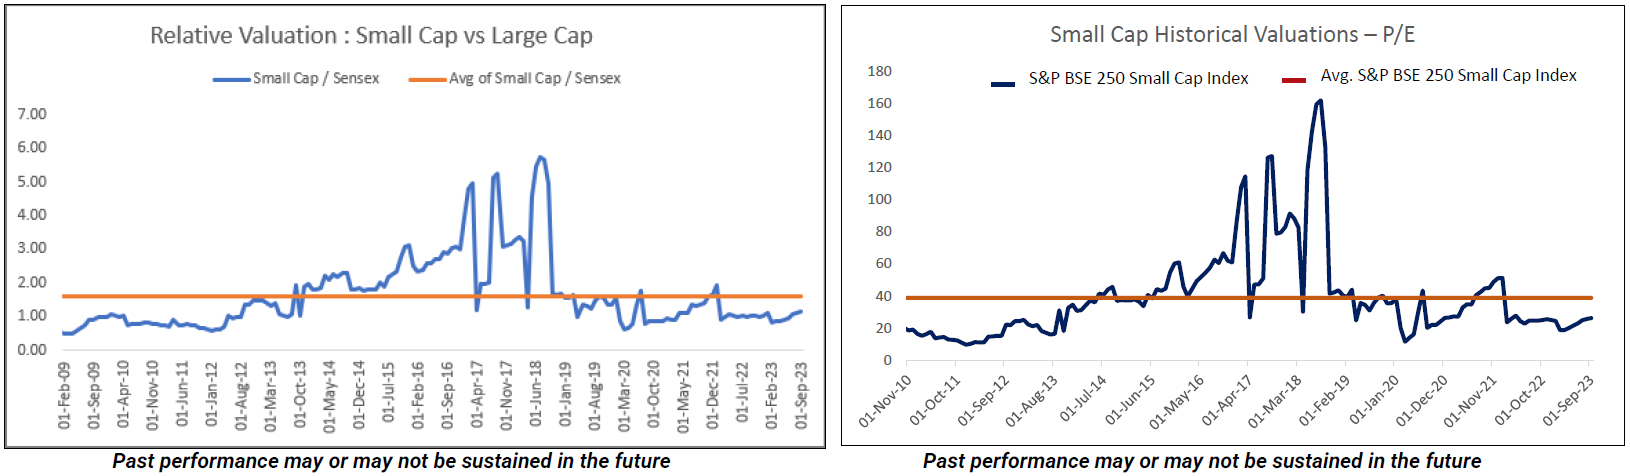 Valuations and Smallcap Index-to-Sensex Ratio